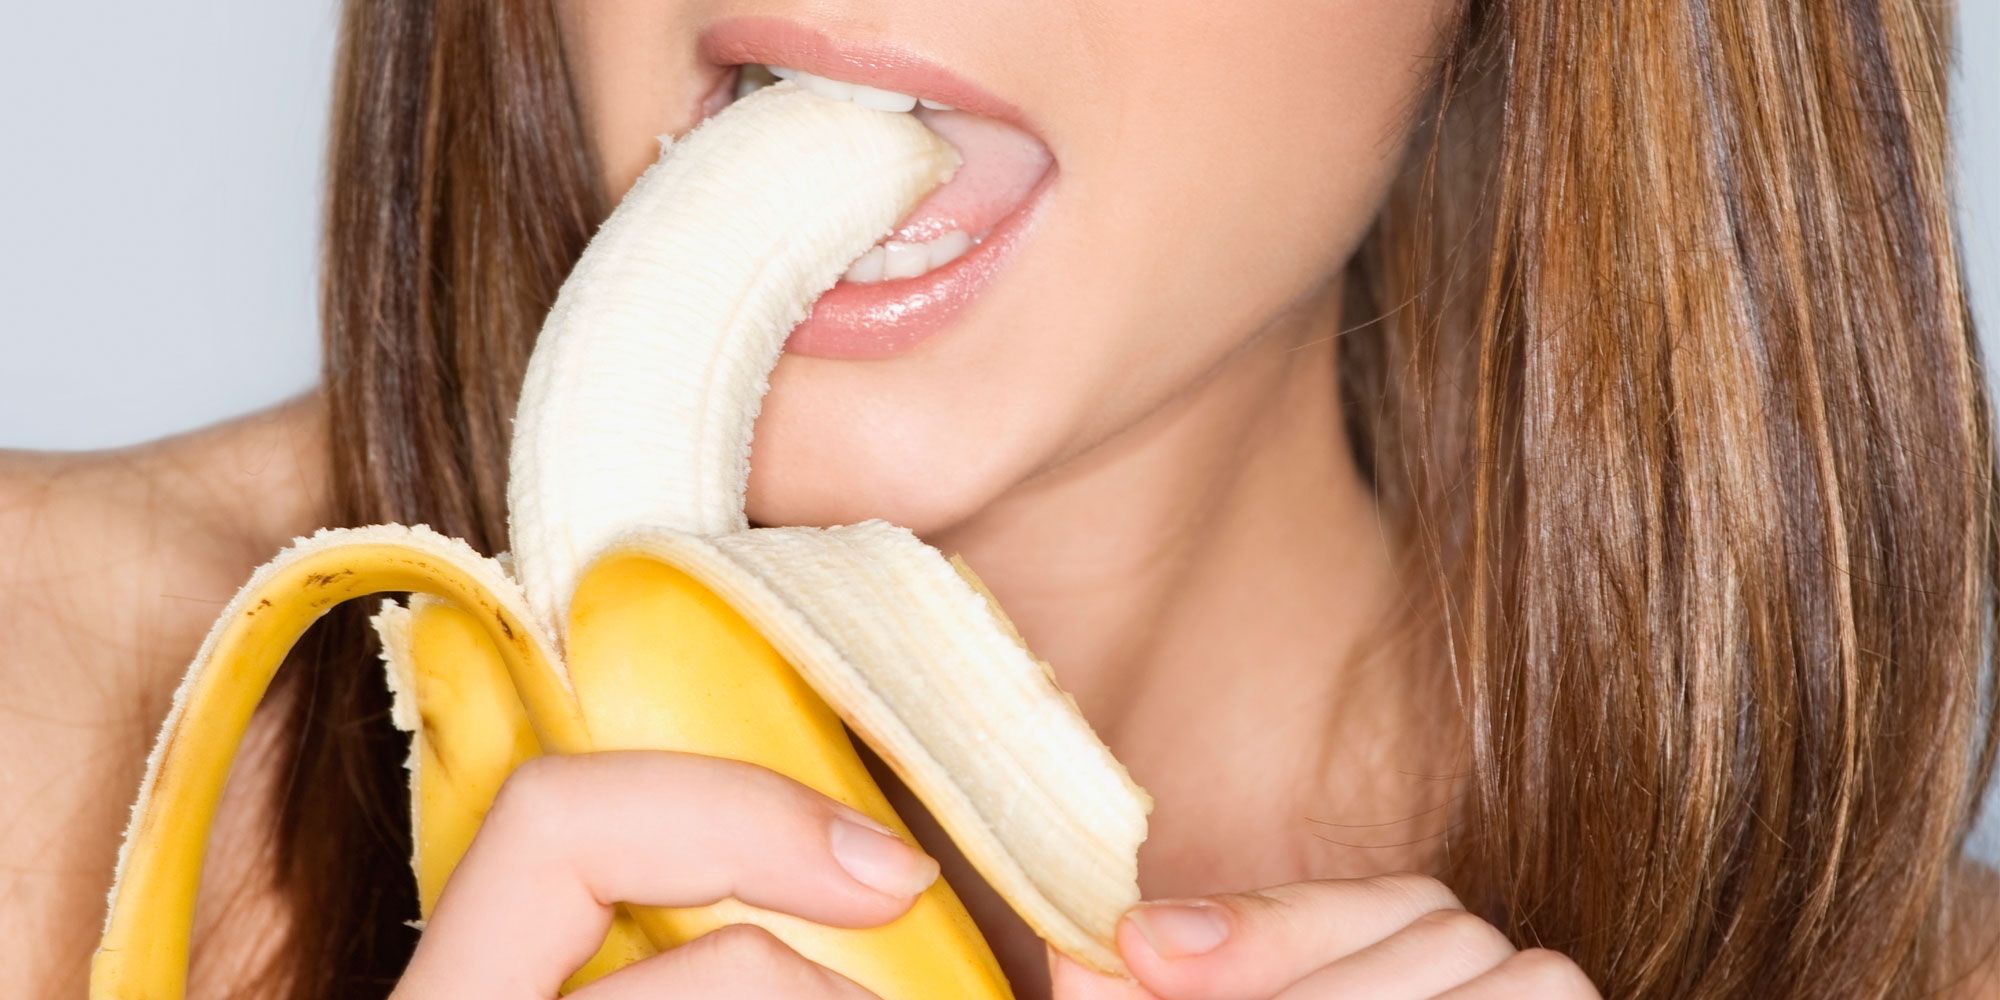 11 Things Women Wish Guys Knew About Giving Blow Jobs image